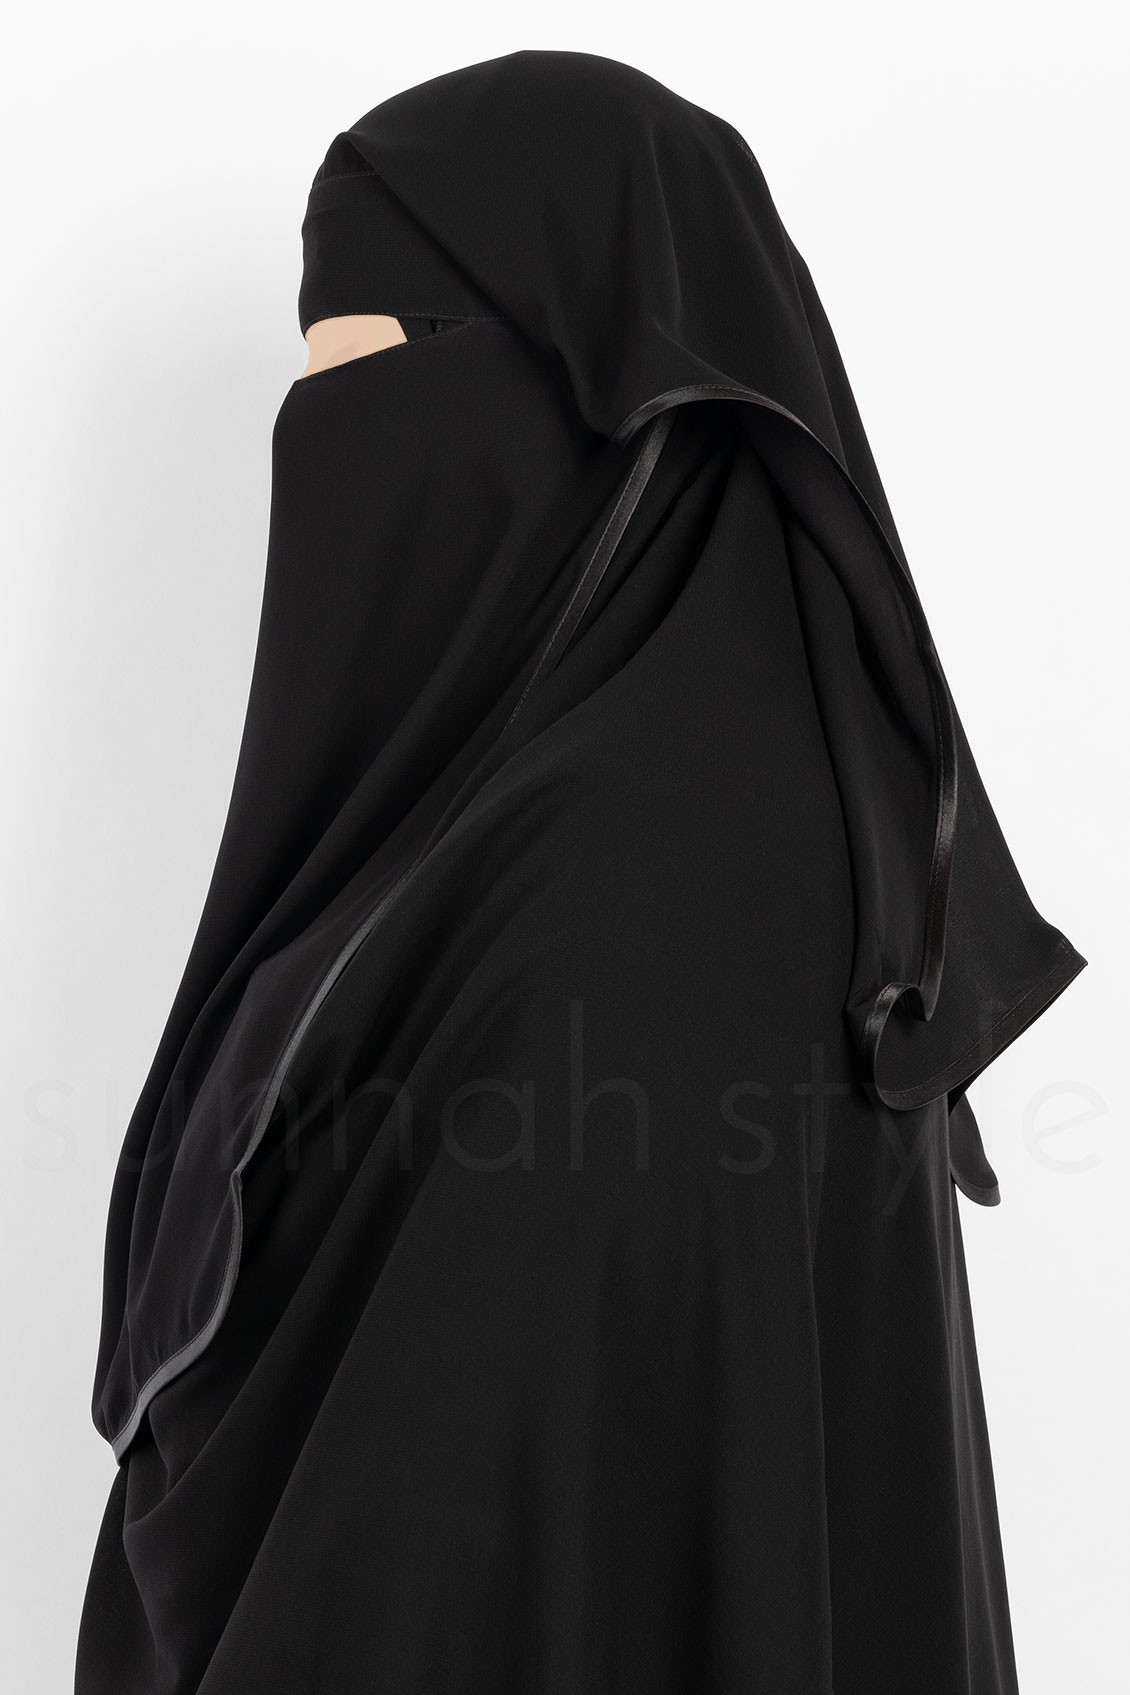 Sunnah Style Satin Trimmed Two Layer Niqab Black